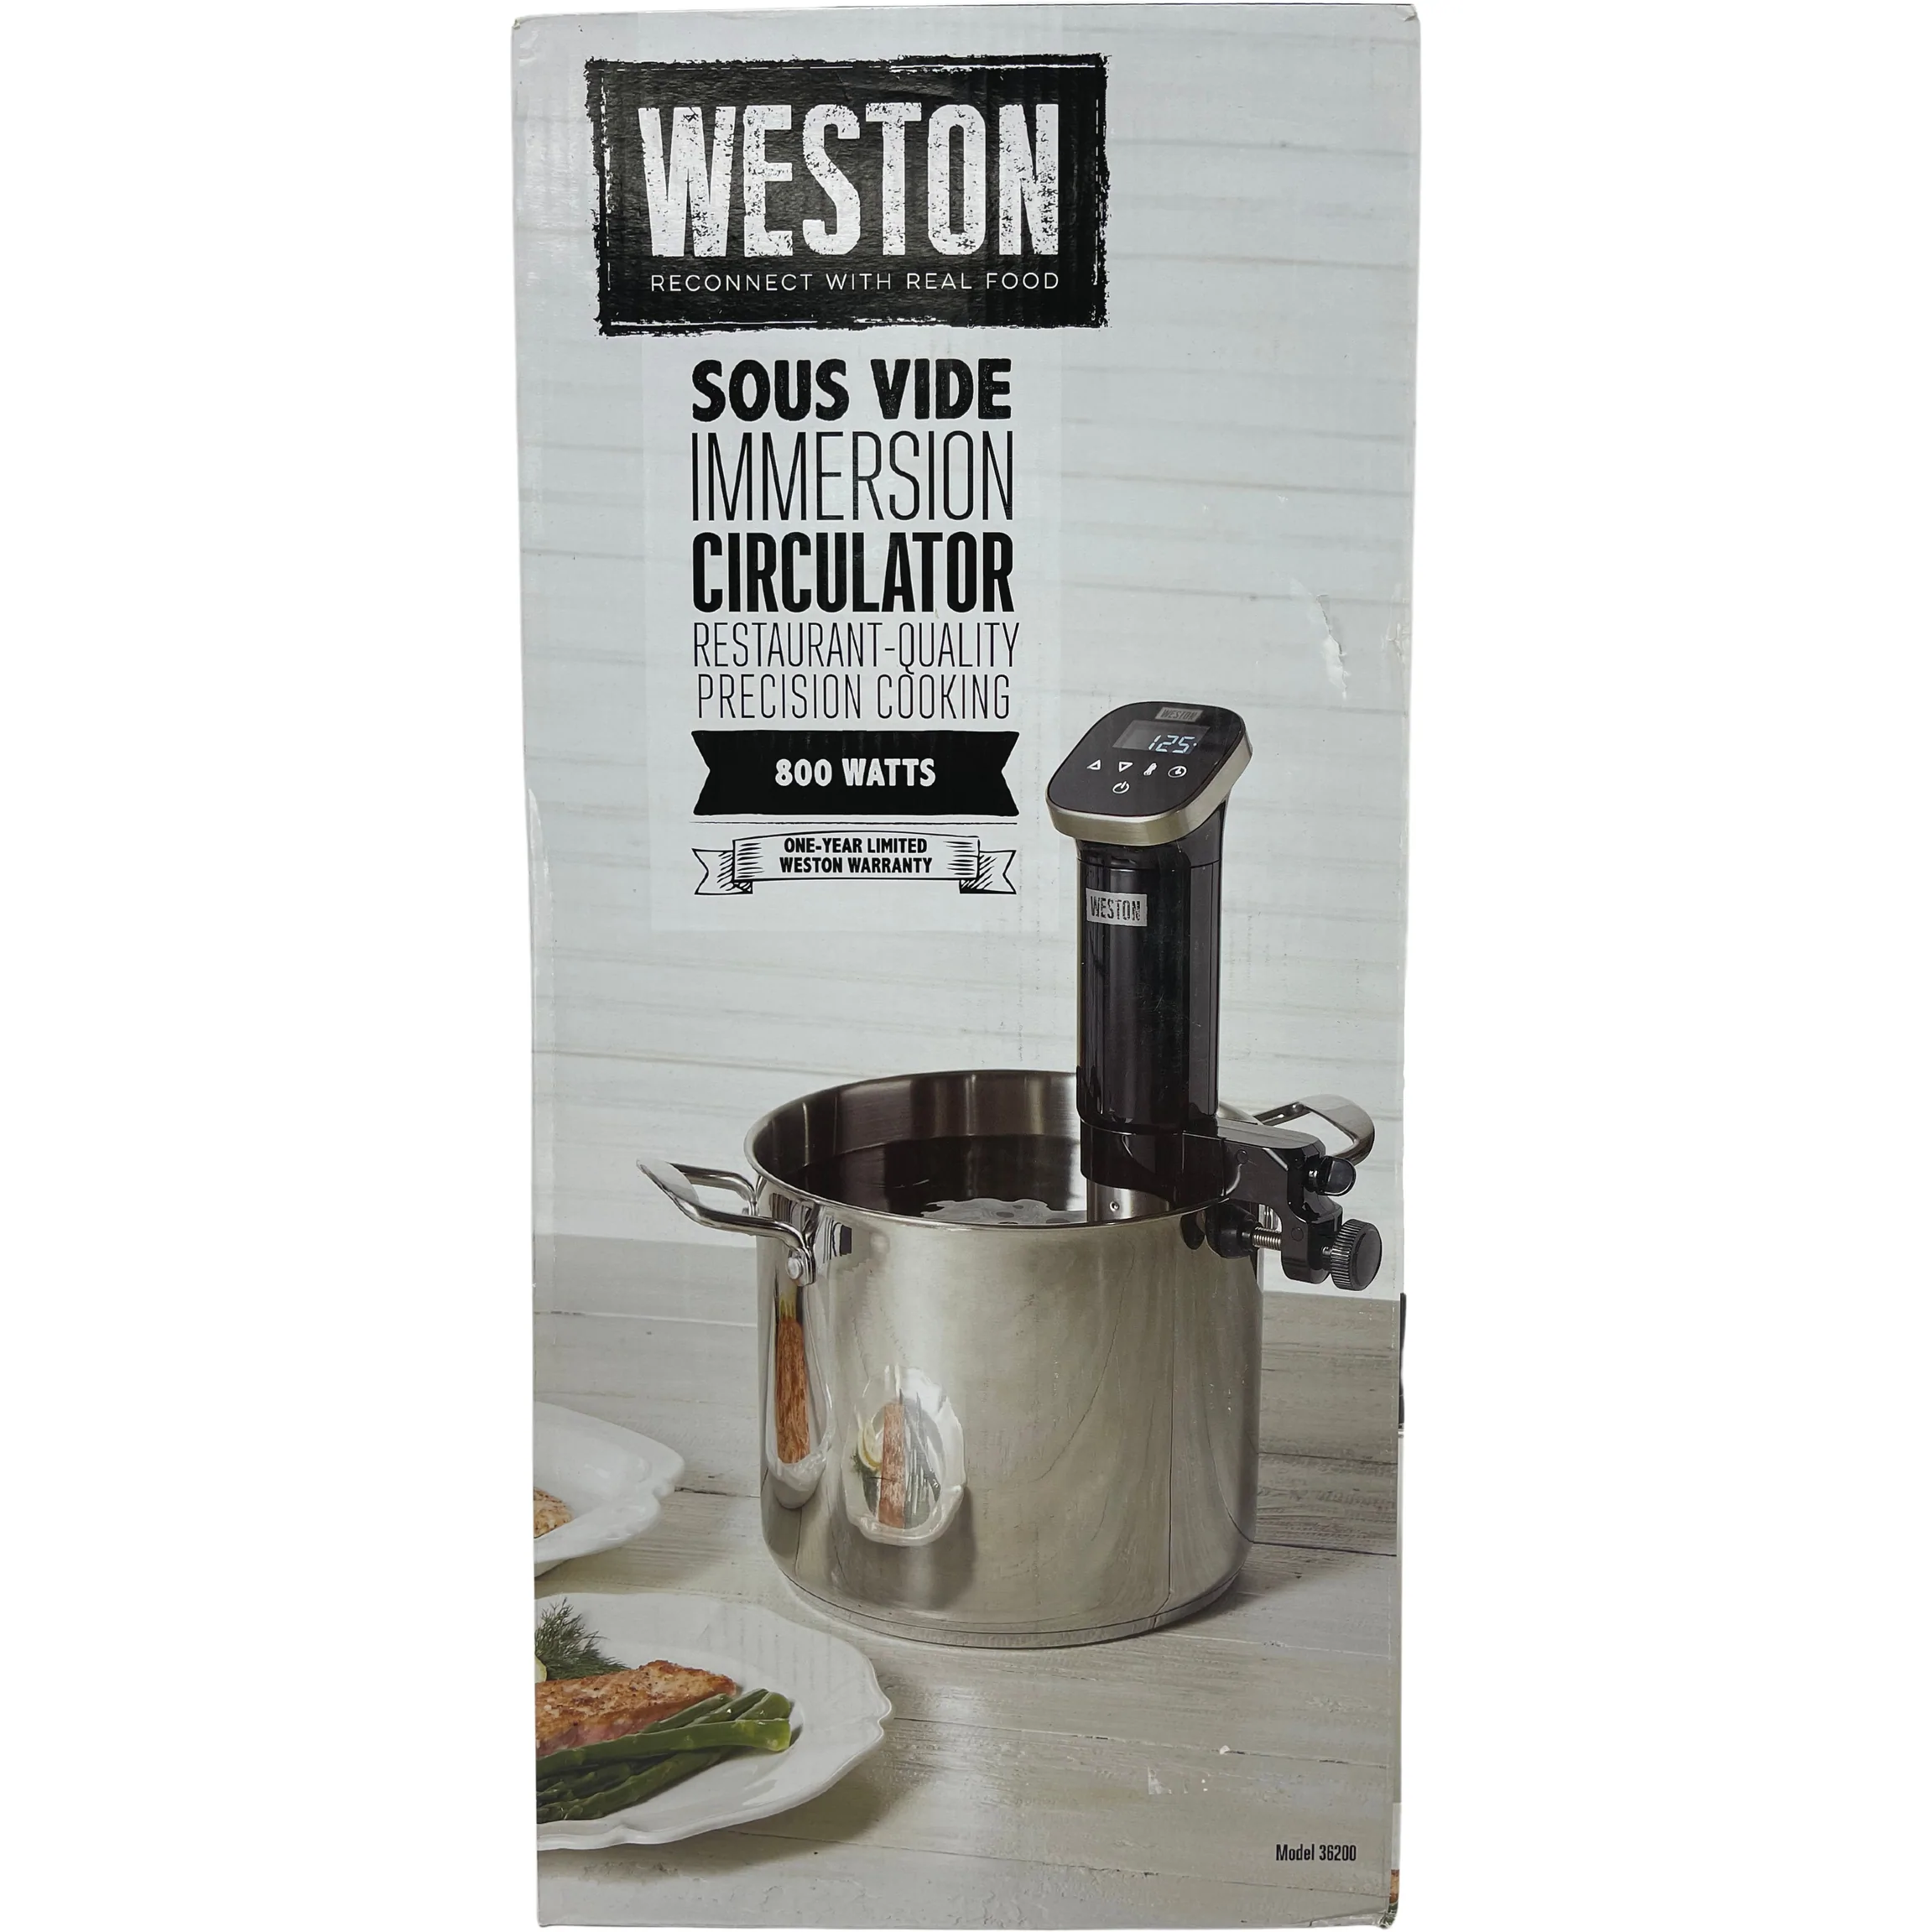 Weston Sous Vide Immersion Circulator / 800 Watts / Restaurant Quality / Small Kitchen Appliance / Cooking Equipment **DEALS**